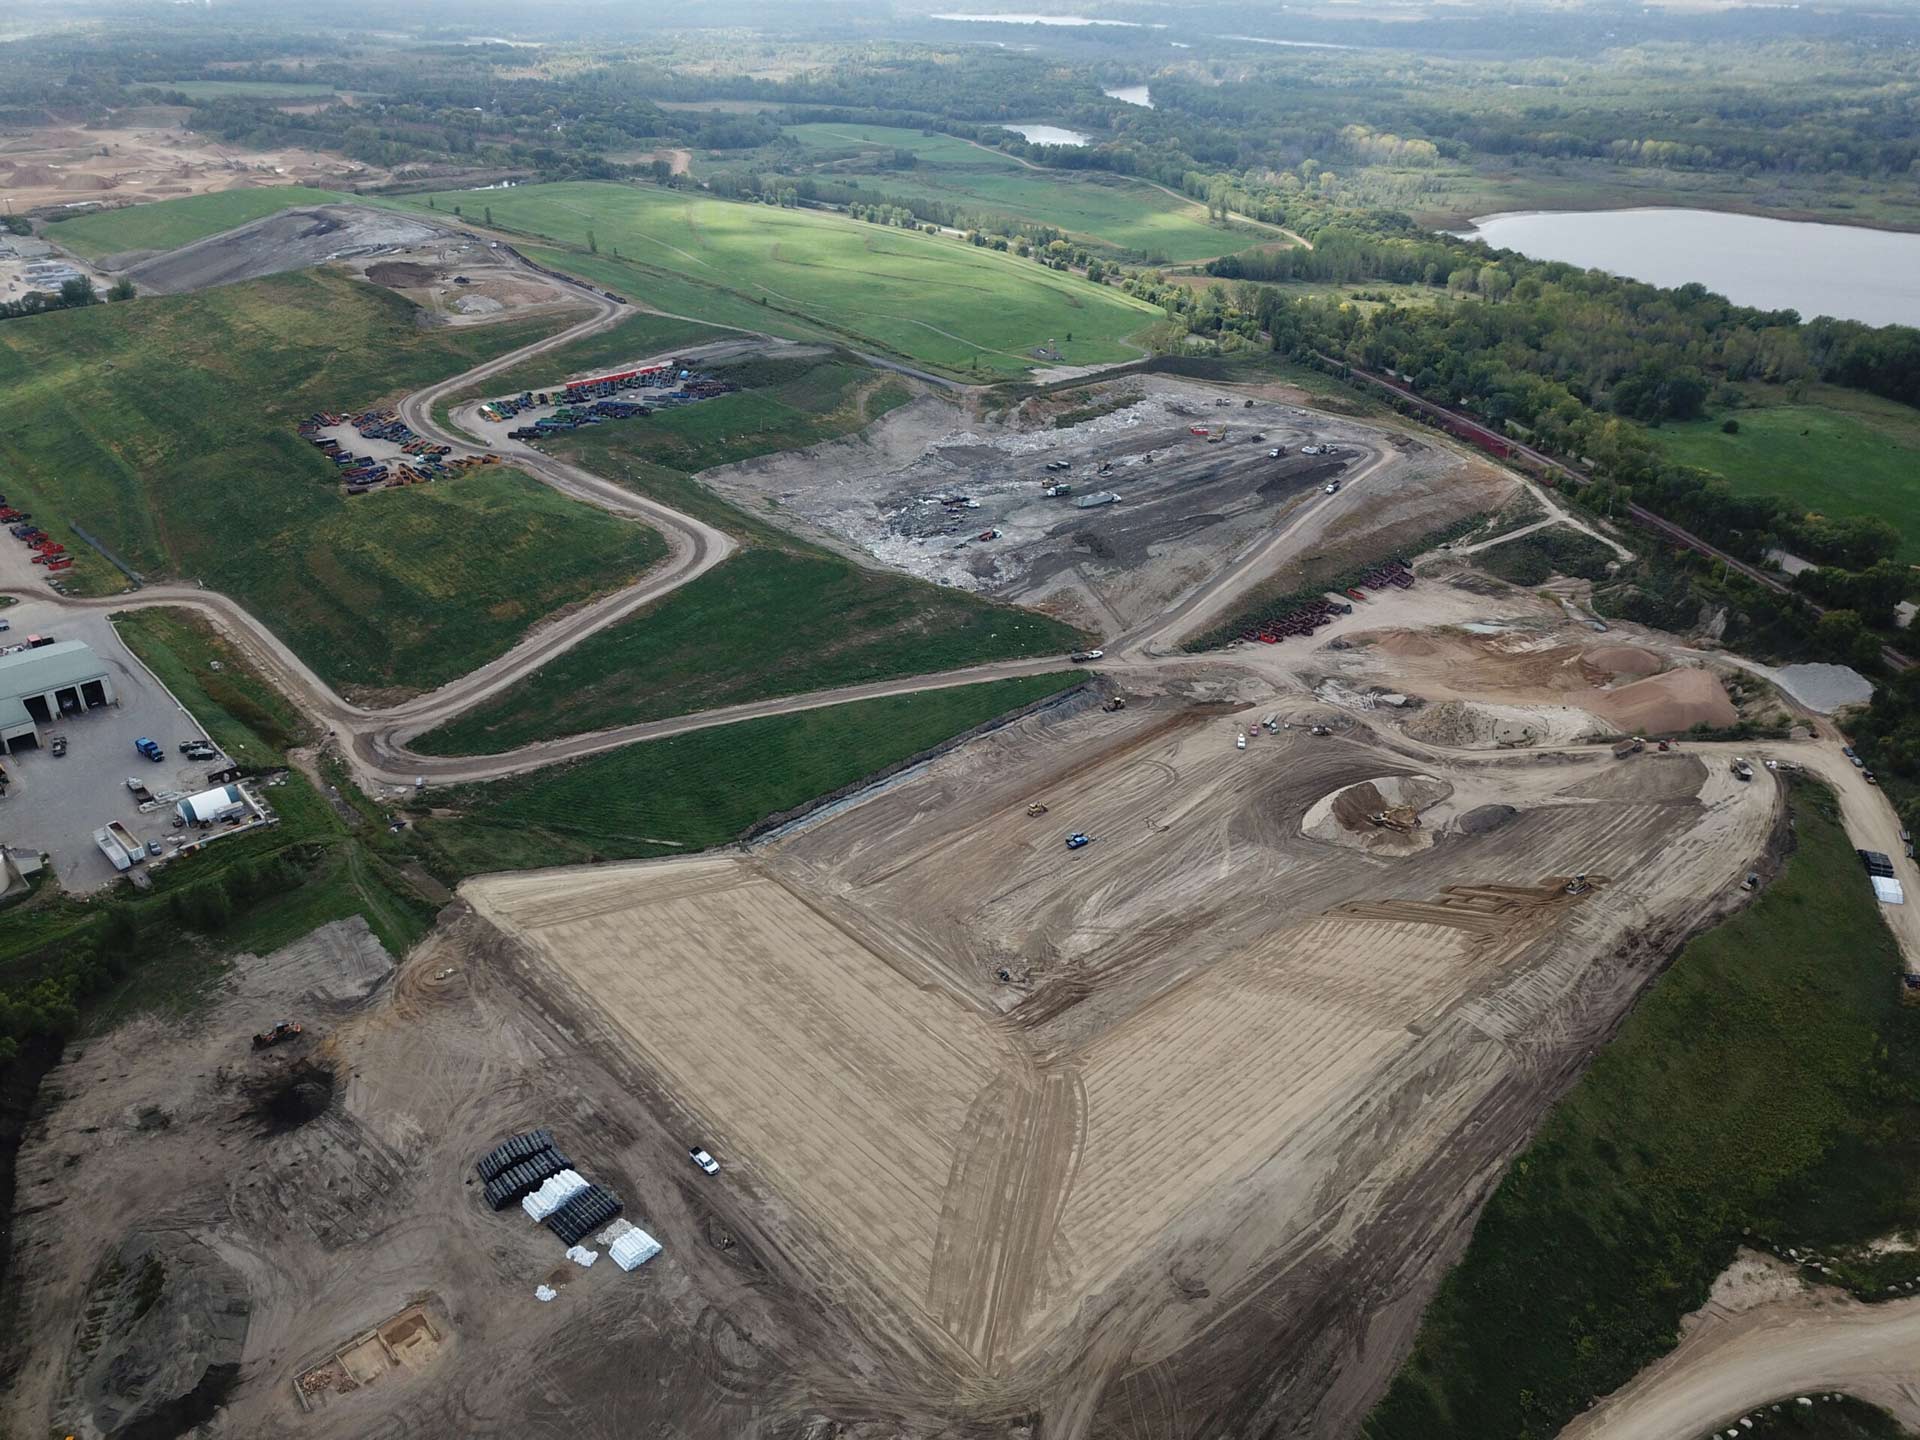 Aerial view of the landfill, with water in forest on horizon